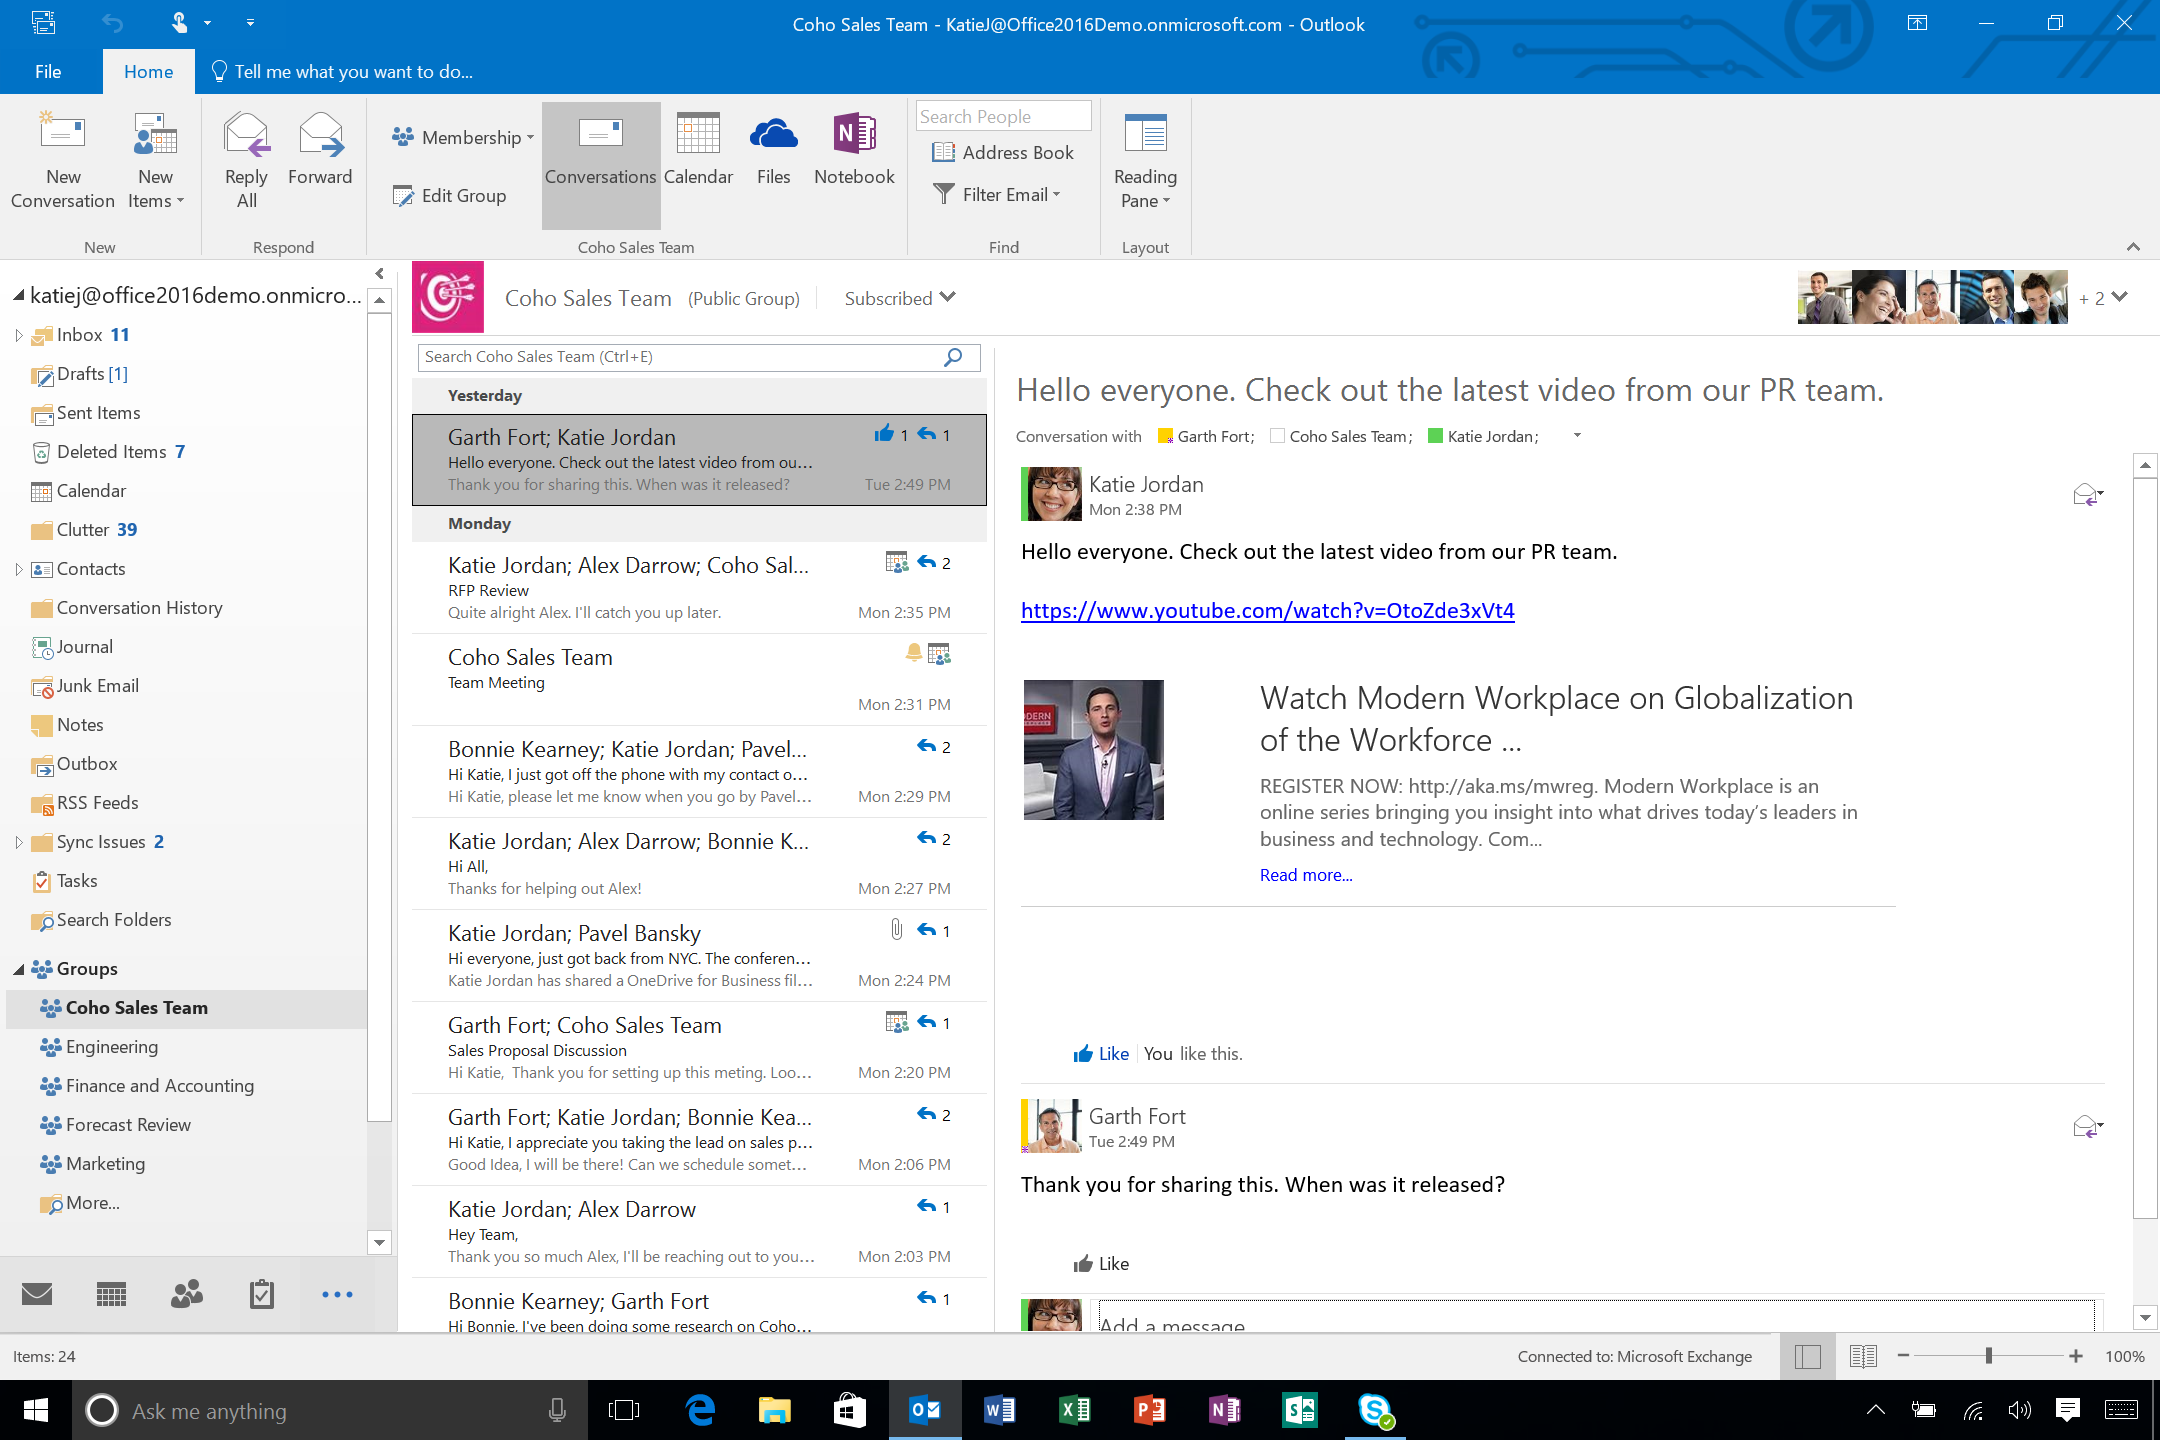 office 365 mail vs outlook